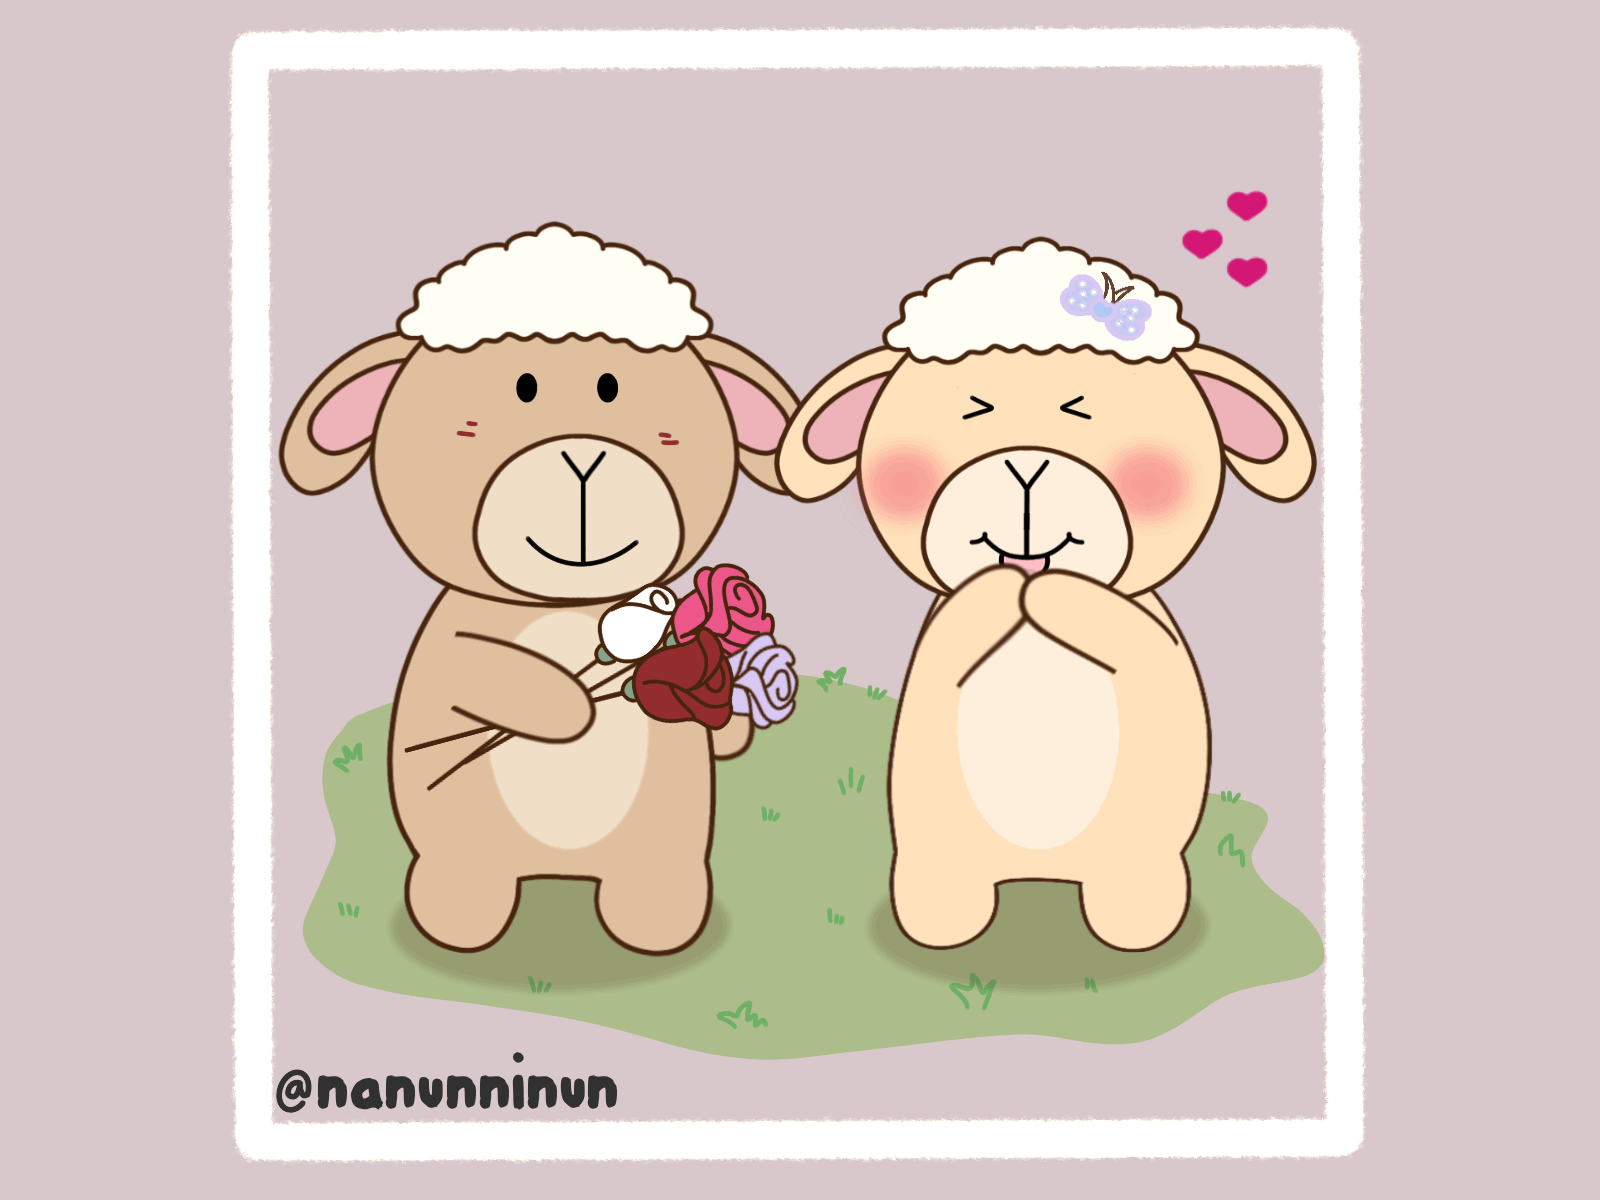 Rose for love🌹 animated gif animation character comic comic art cute animals cute art design draw drawing gif gif animation gifts illustration procreate